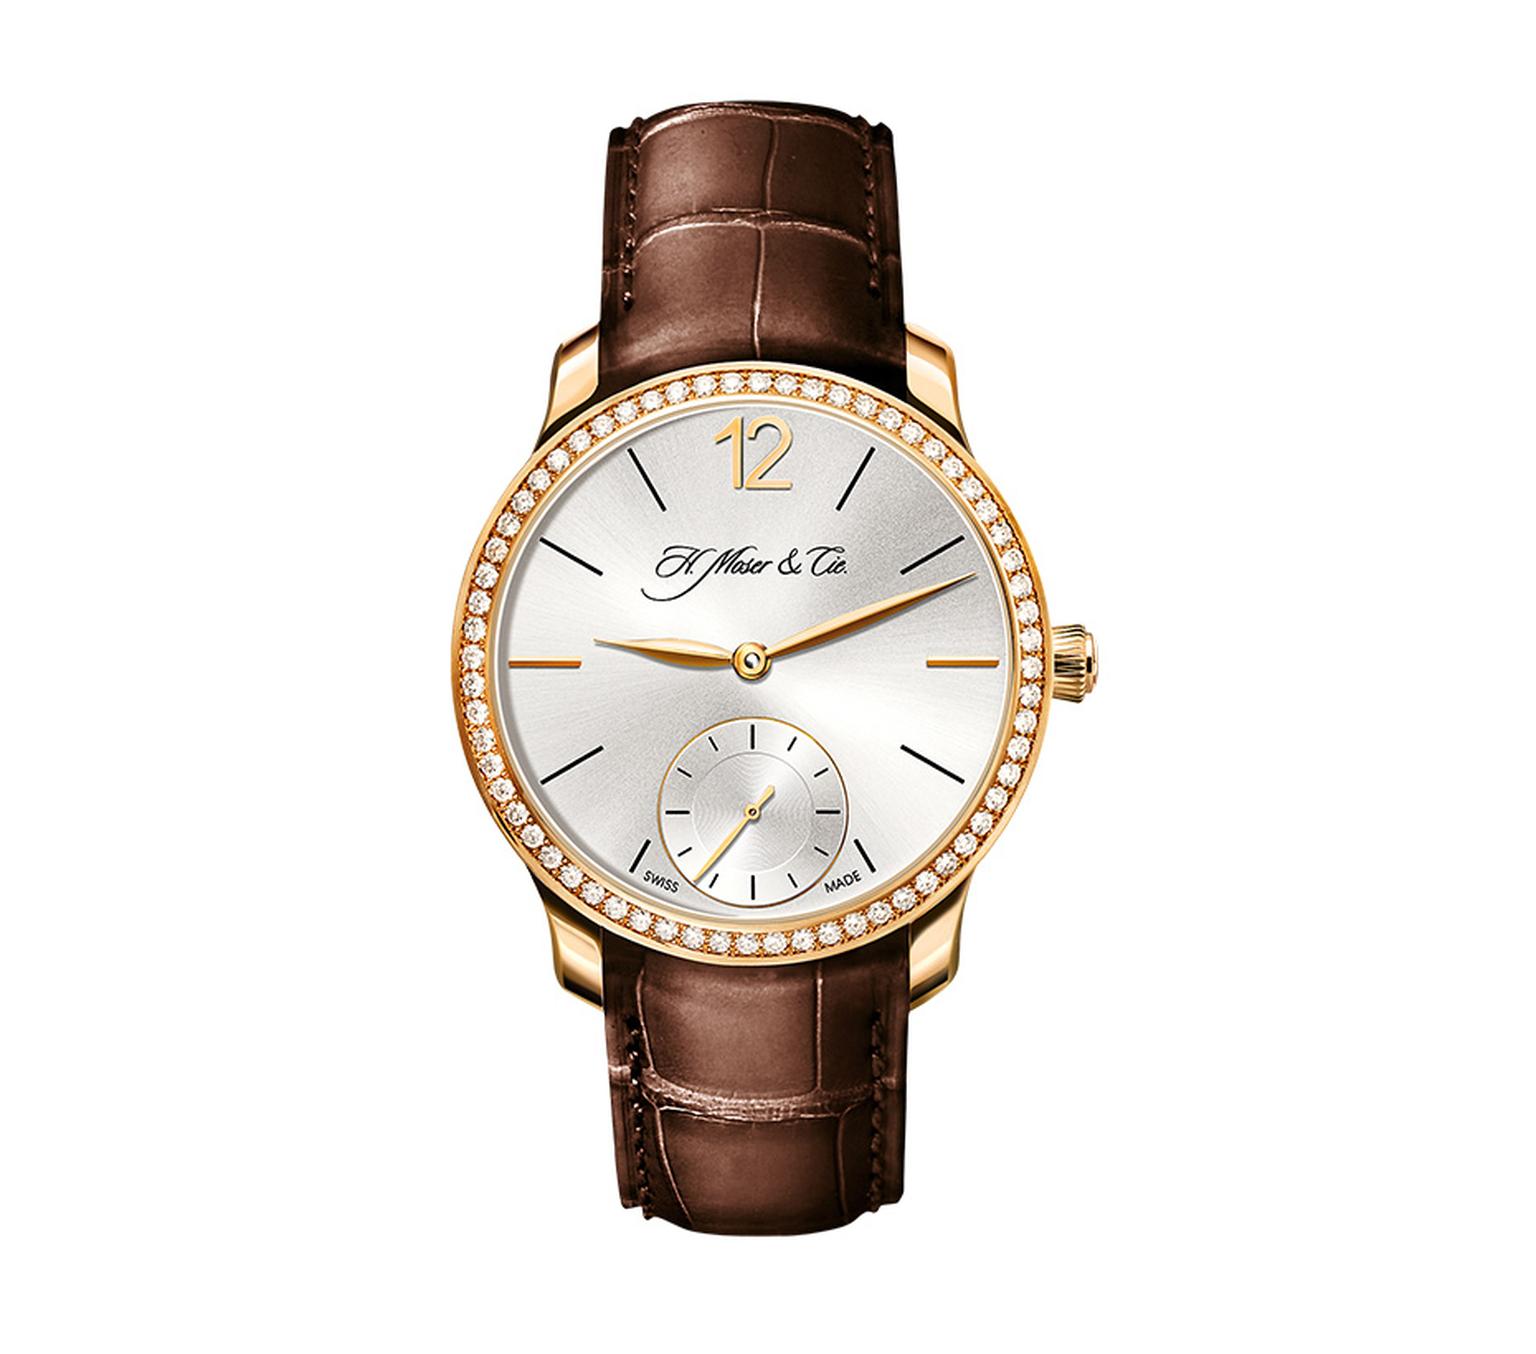 H.Moser & Cie Mayu watch in rose gold with diamonds.